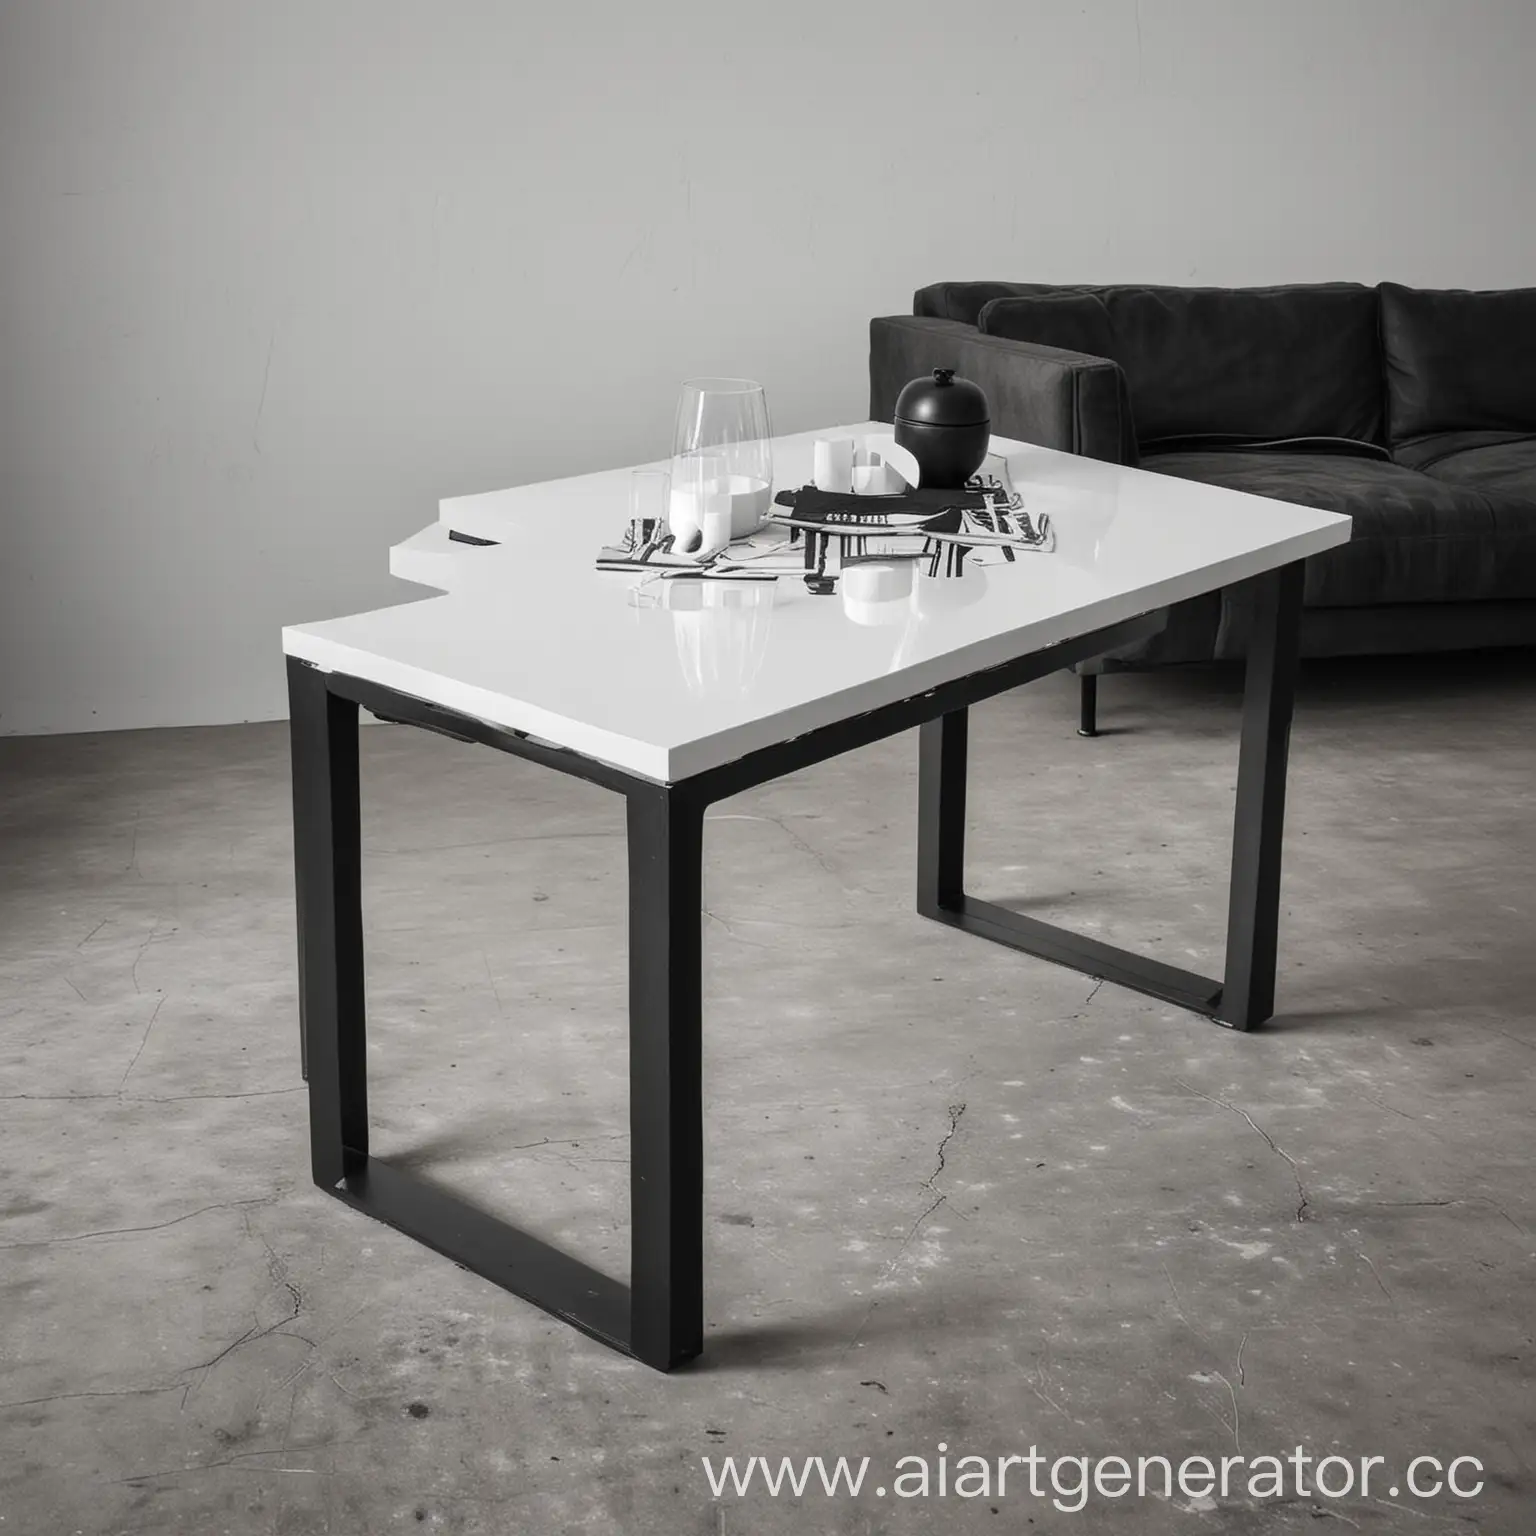 Contemporary-Monochrome-Table-Setting-with-Minimalist-Style